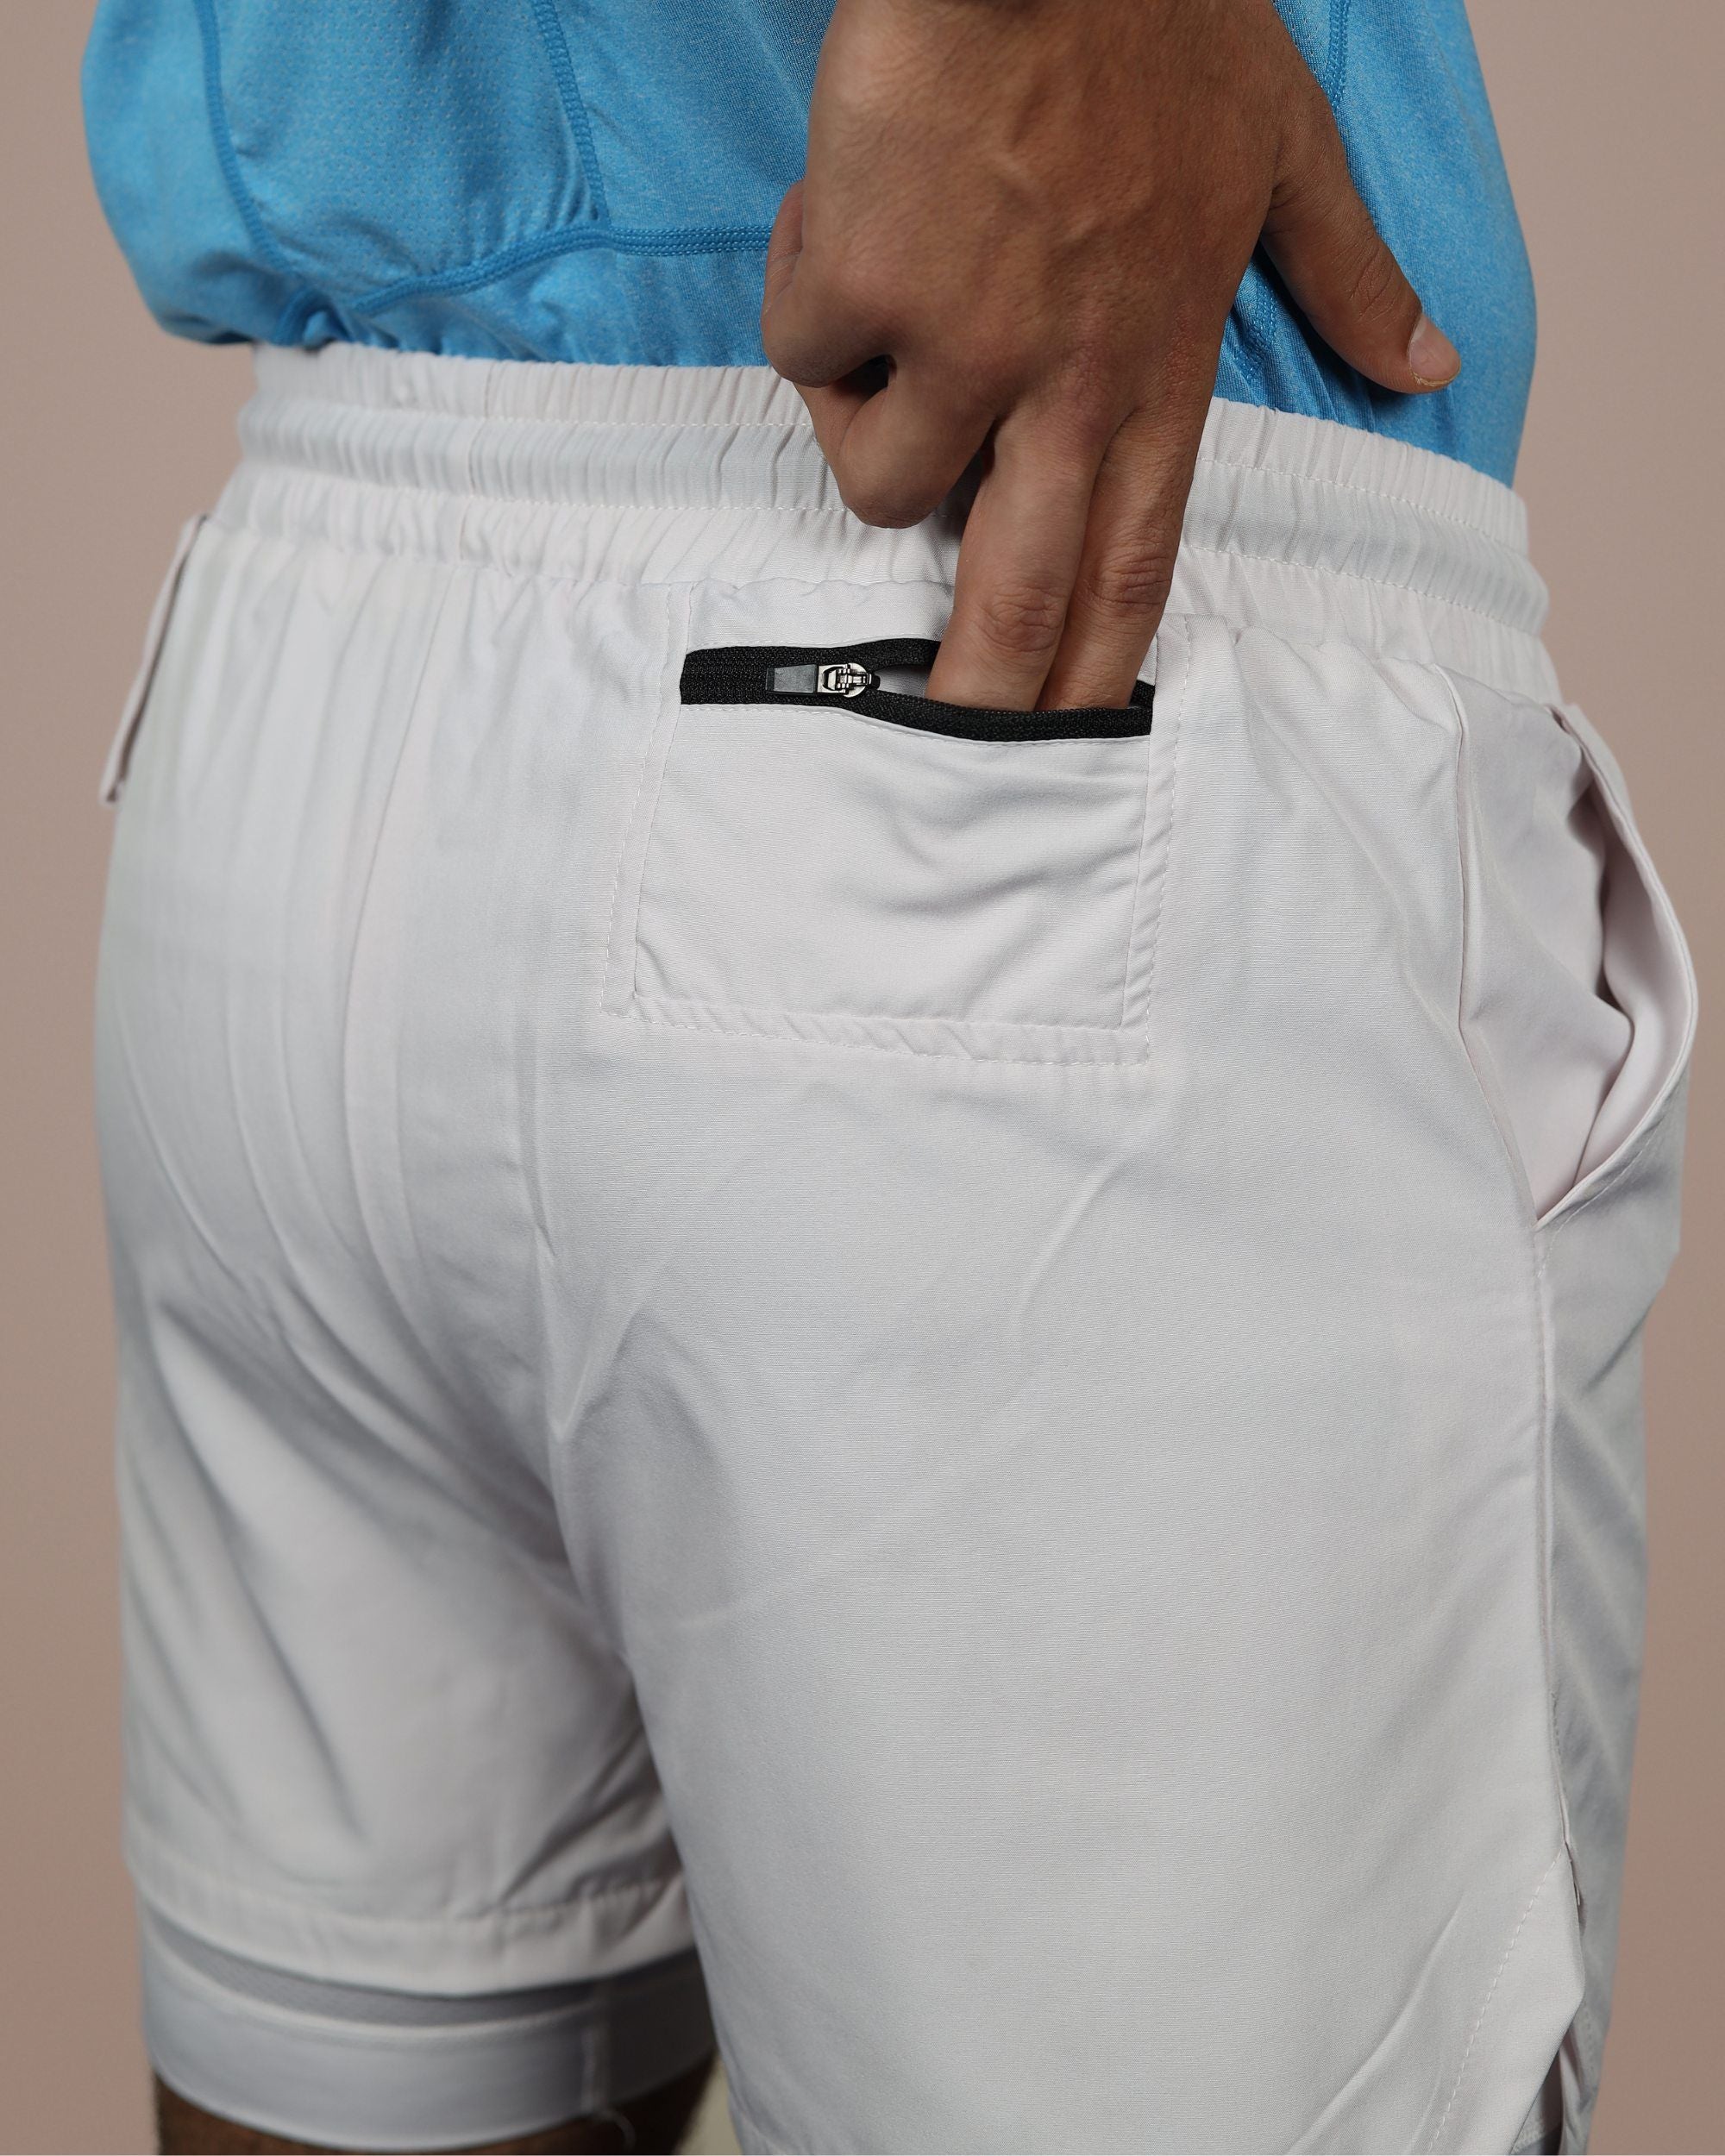 SprintHint 2 in 1 Shorts (7" Inseam) - White - THUGFIT